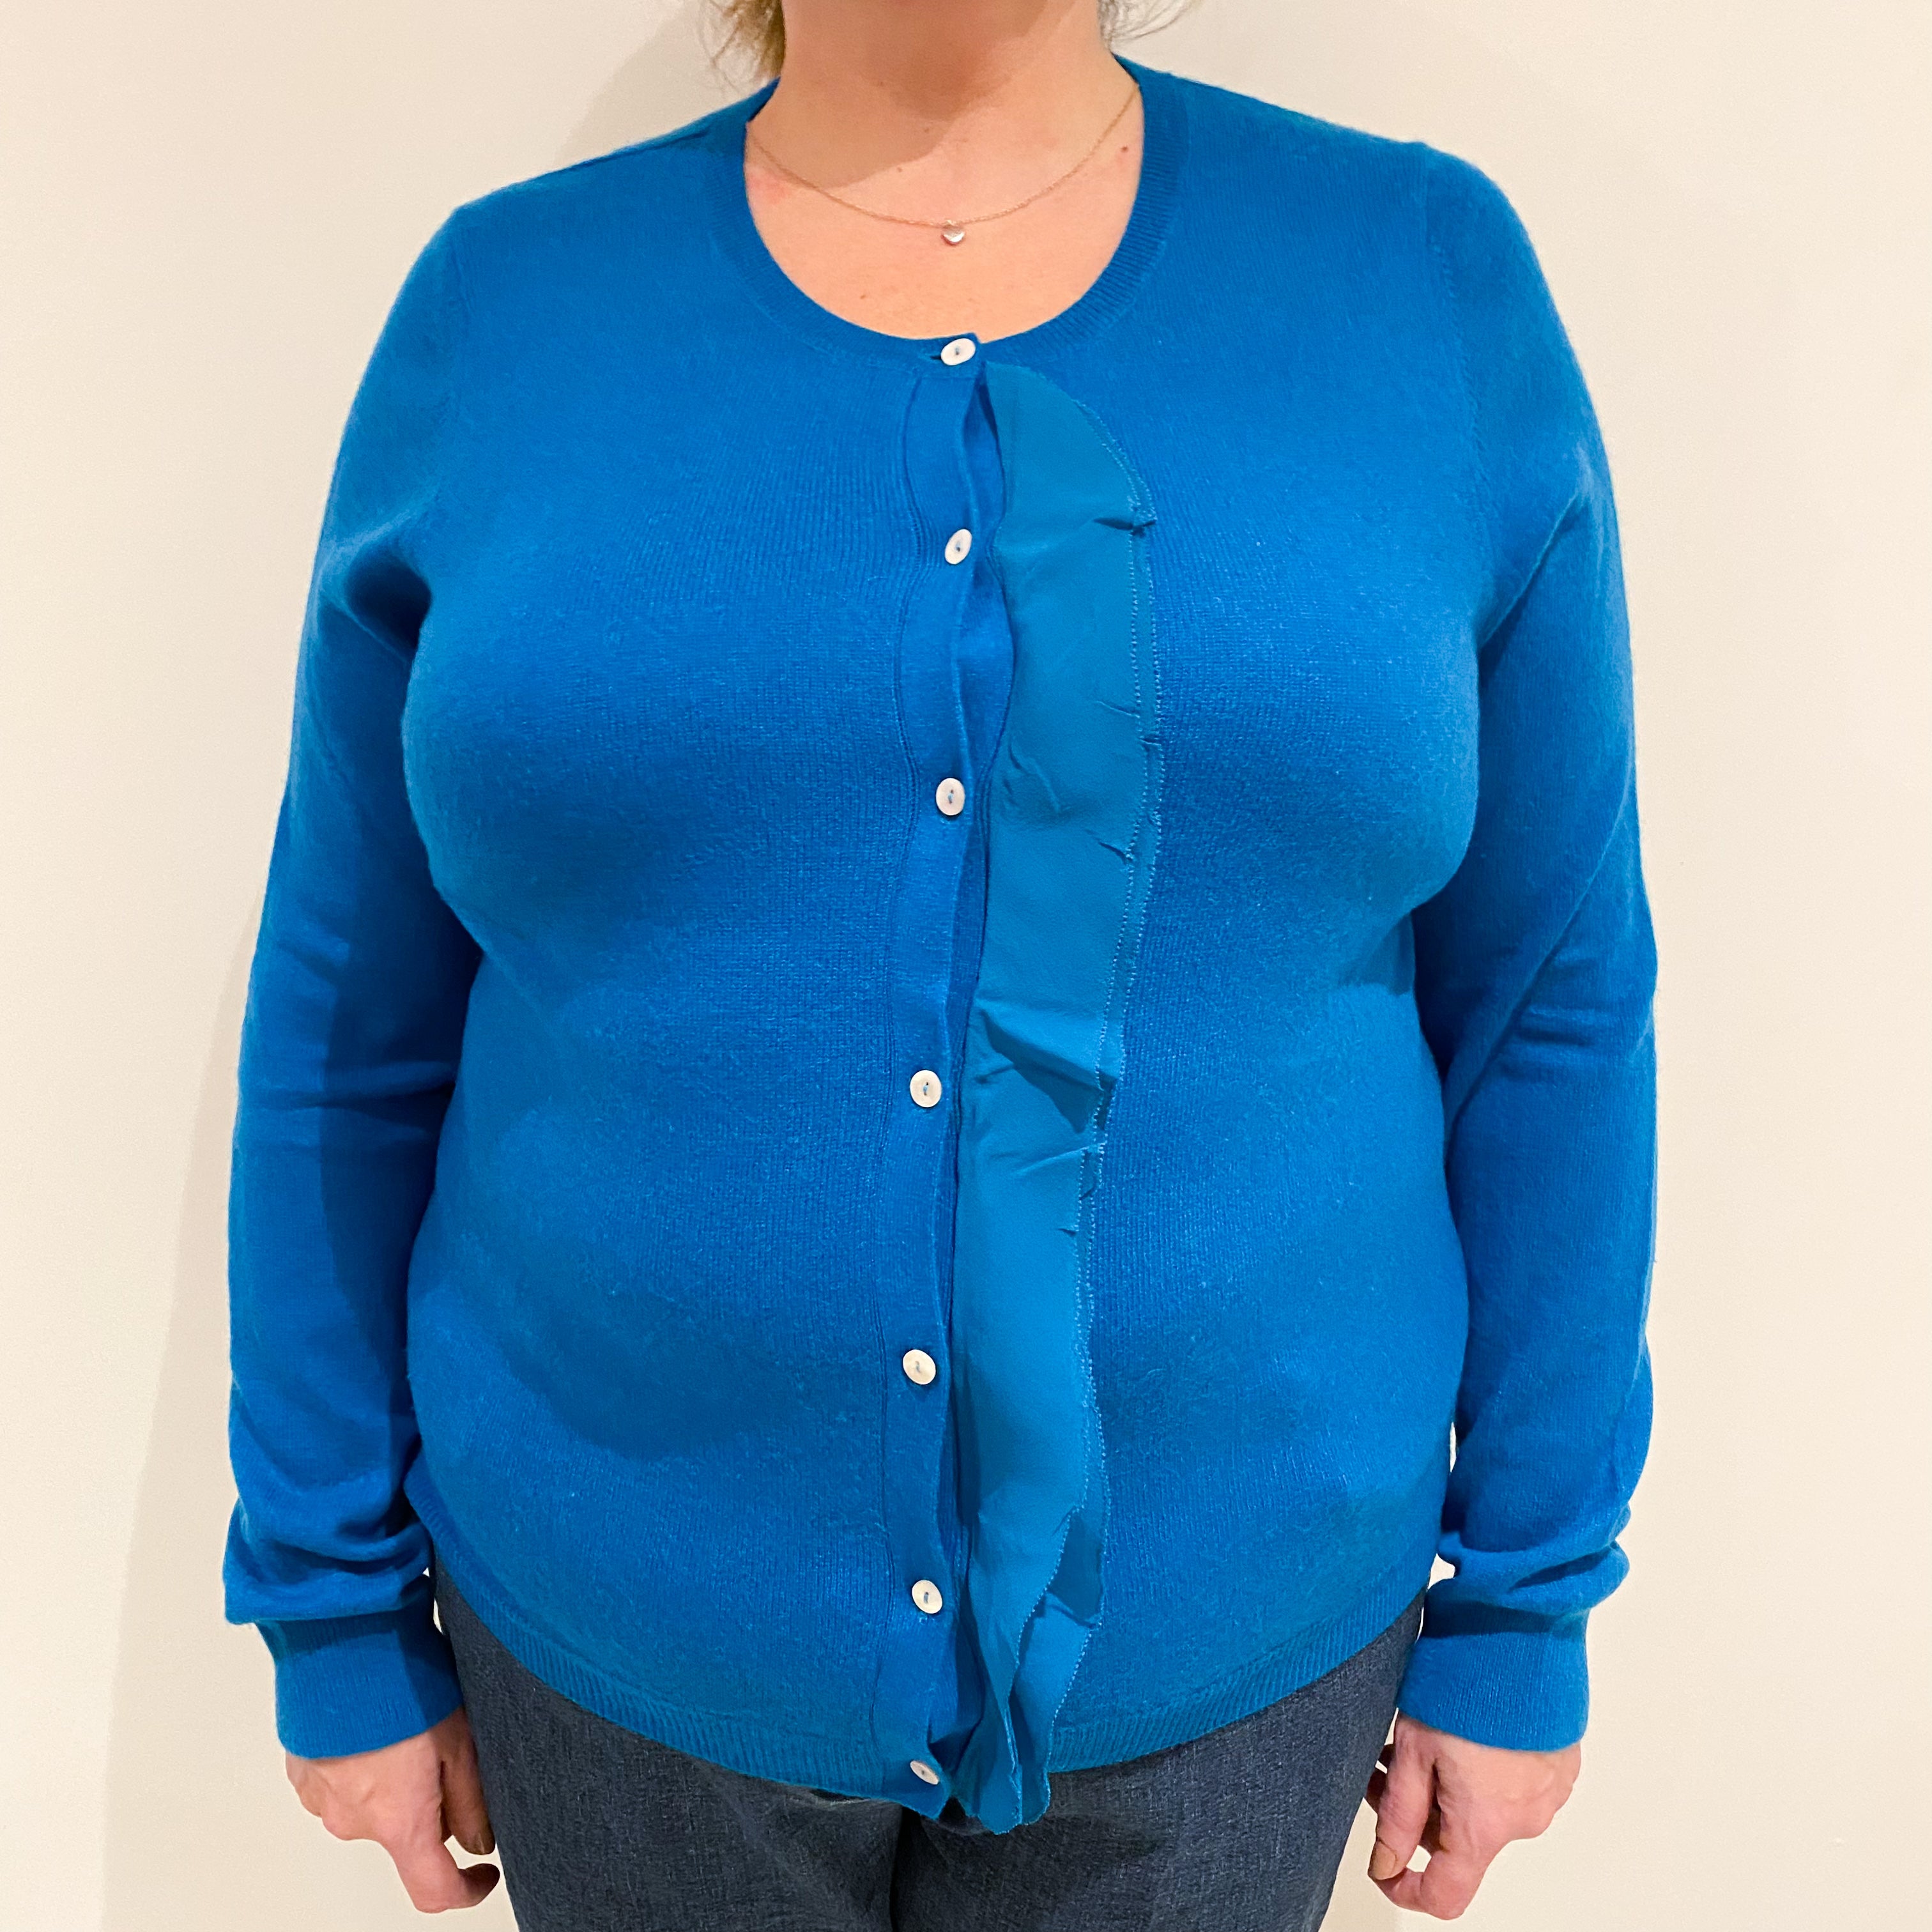 Bright Teal Blue Cashmere Crew Cardigan Extra Large